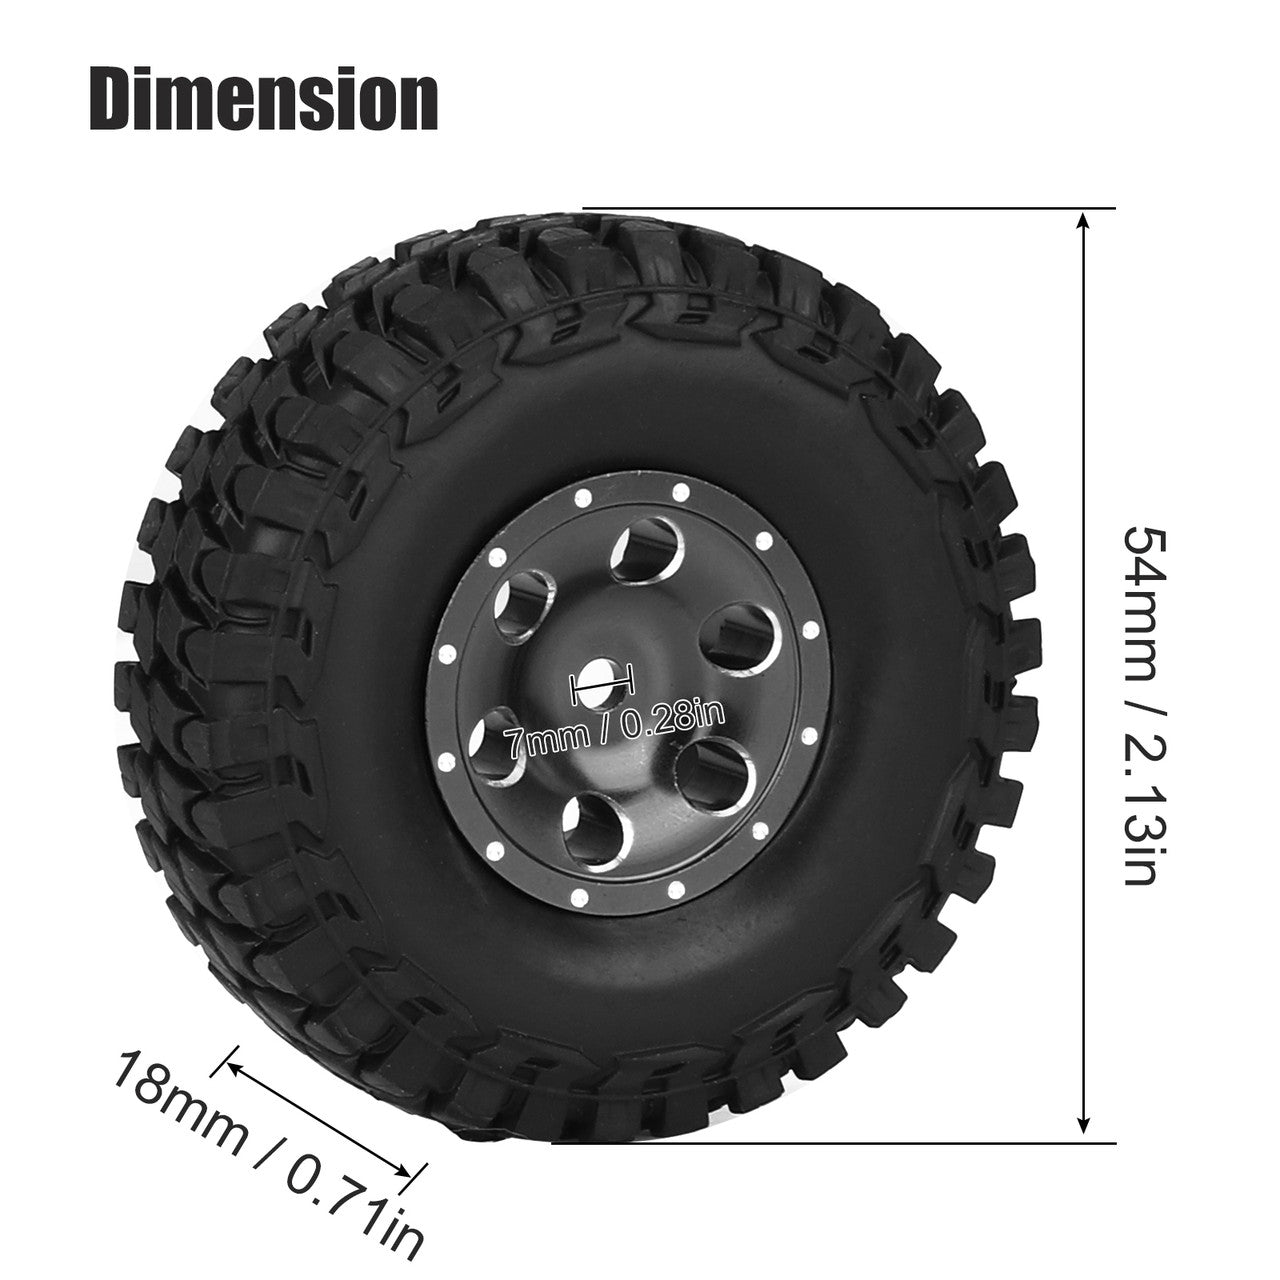 1.0 Bead lock Wheel Rims for 1/24 RC Crawler-the Wheel Rims Are Made of Quality Aluminum Alloy, CNC Machined for Precision